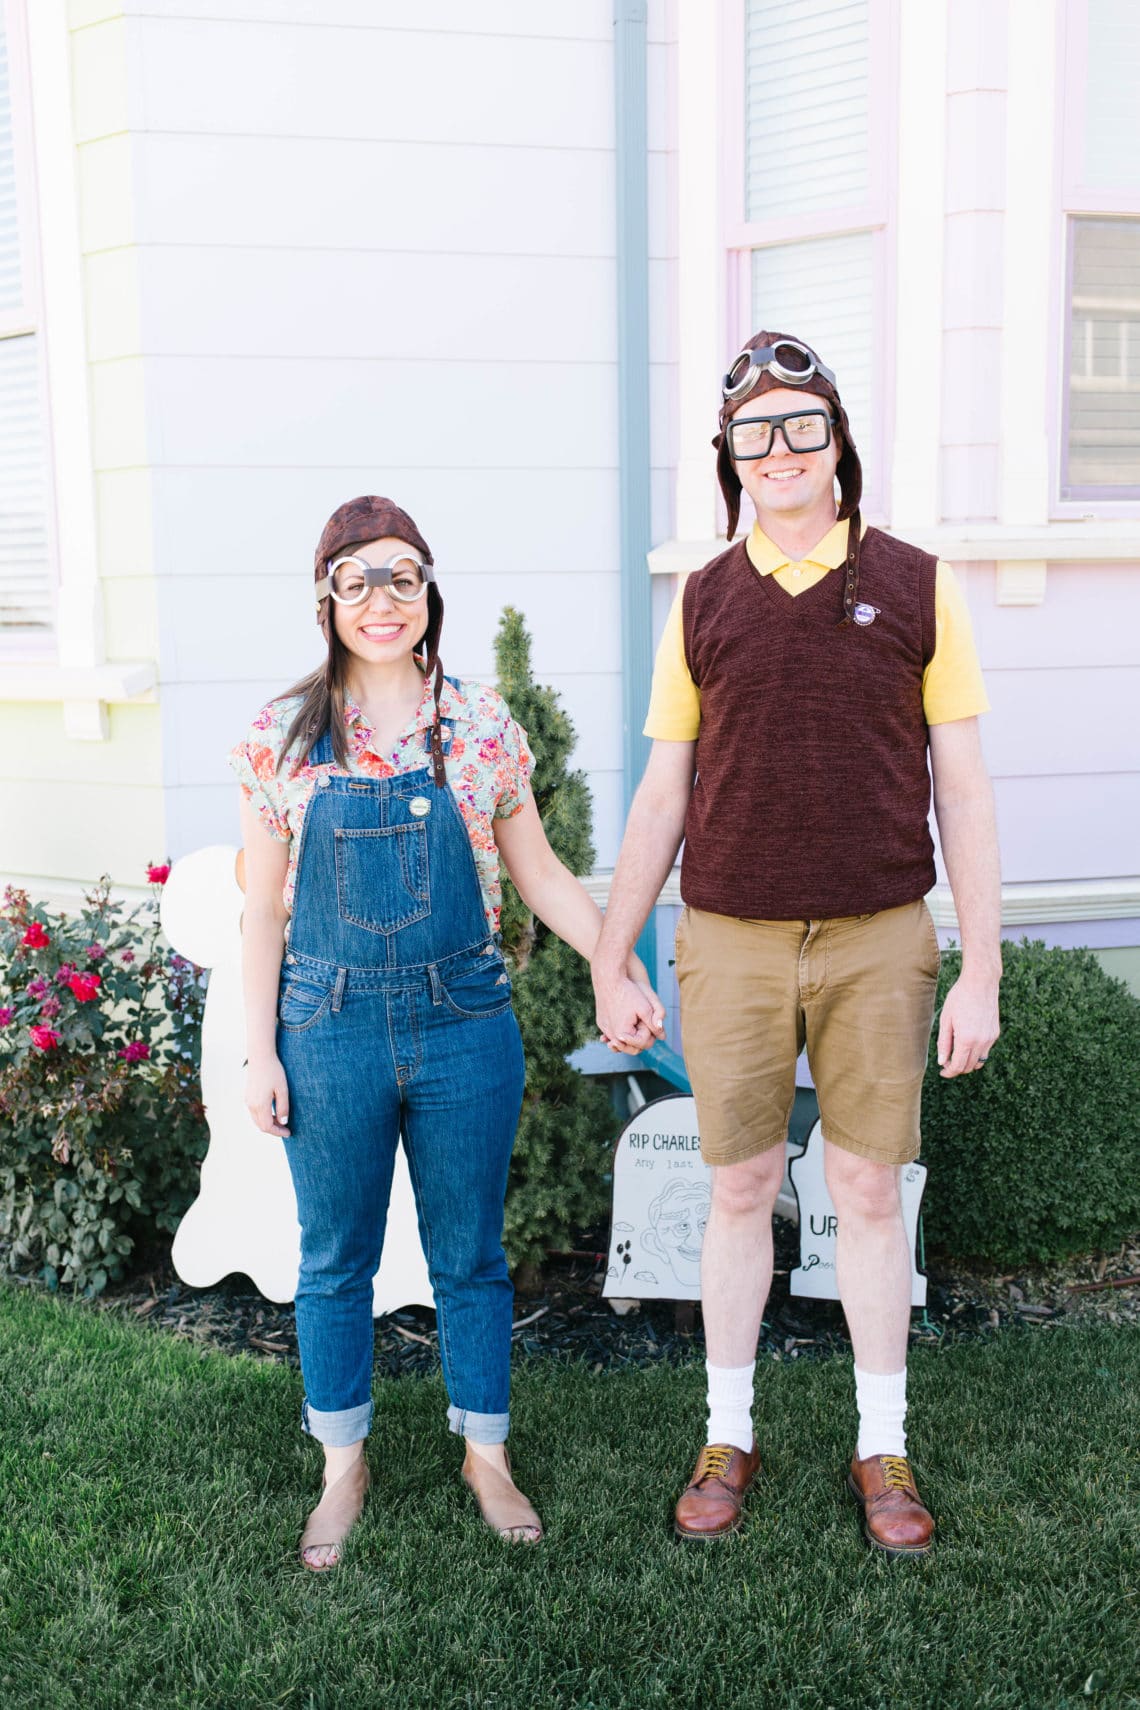 100+ Disney Couple Costumes - Friday We're in Love